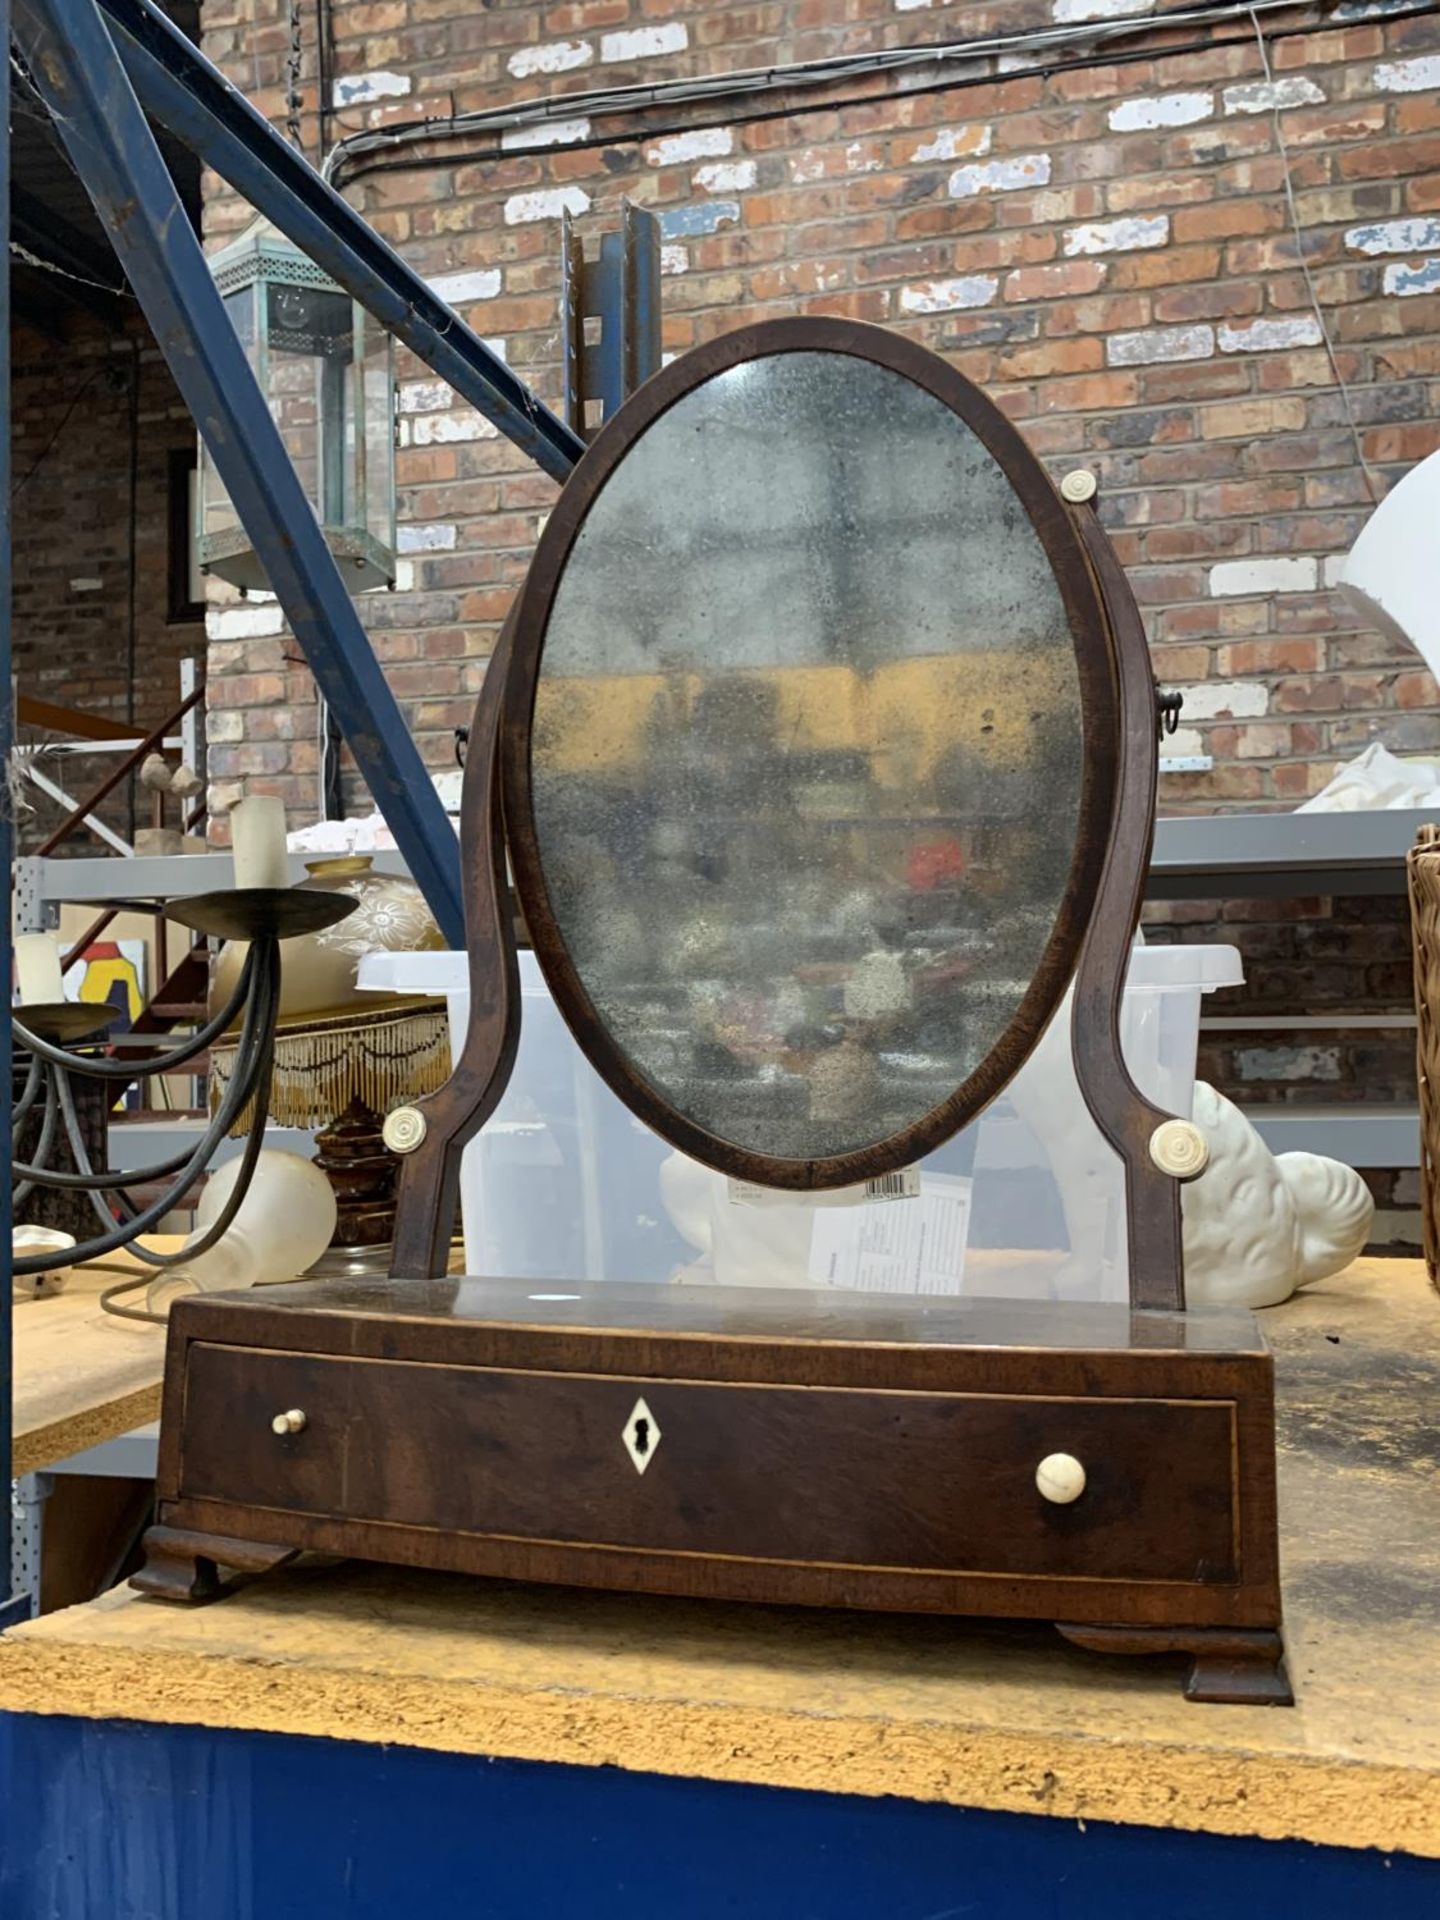 A VINTAGE MAHOGANY DRESSING MIRROR WITH DRAWER